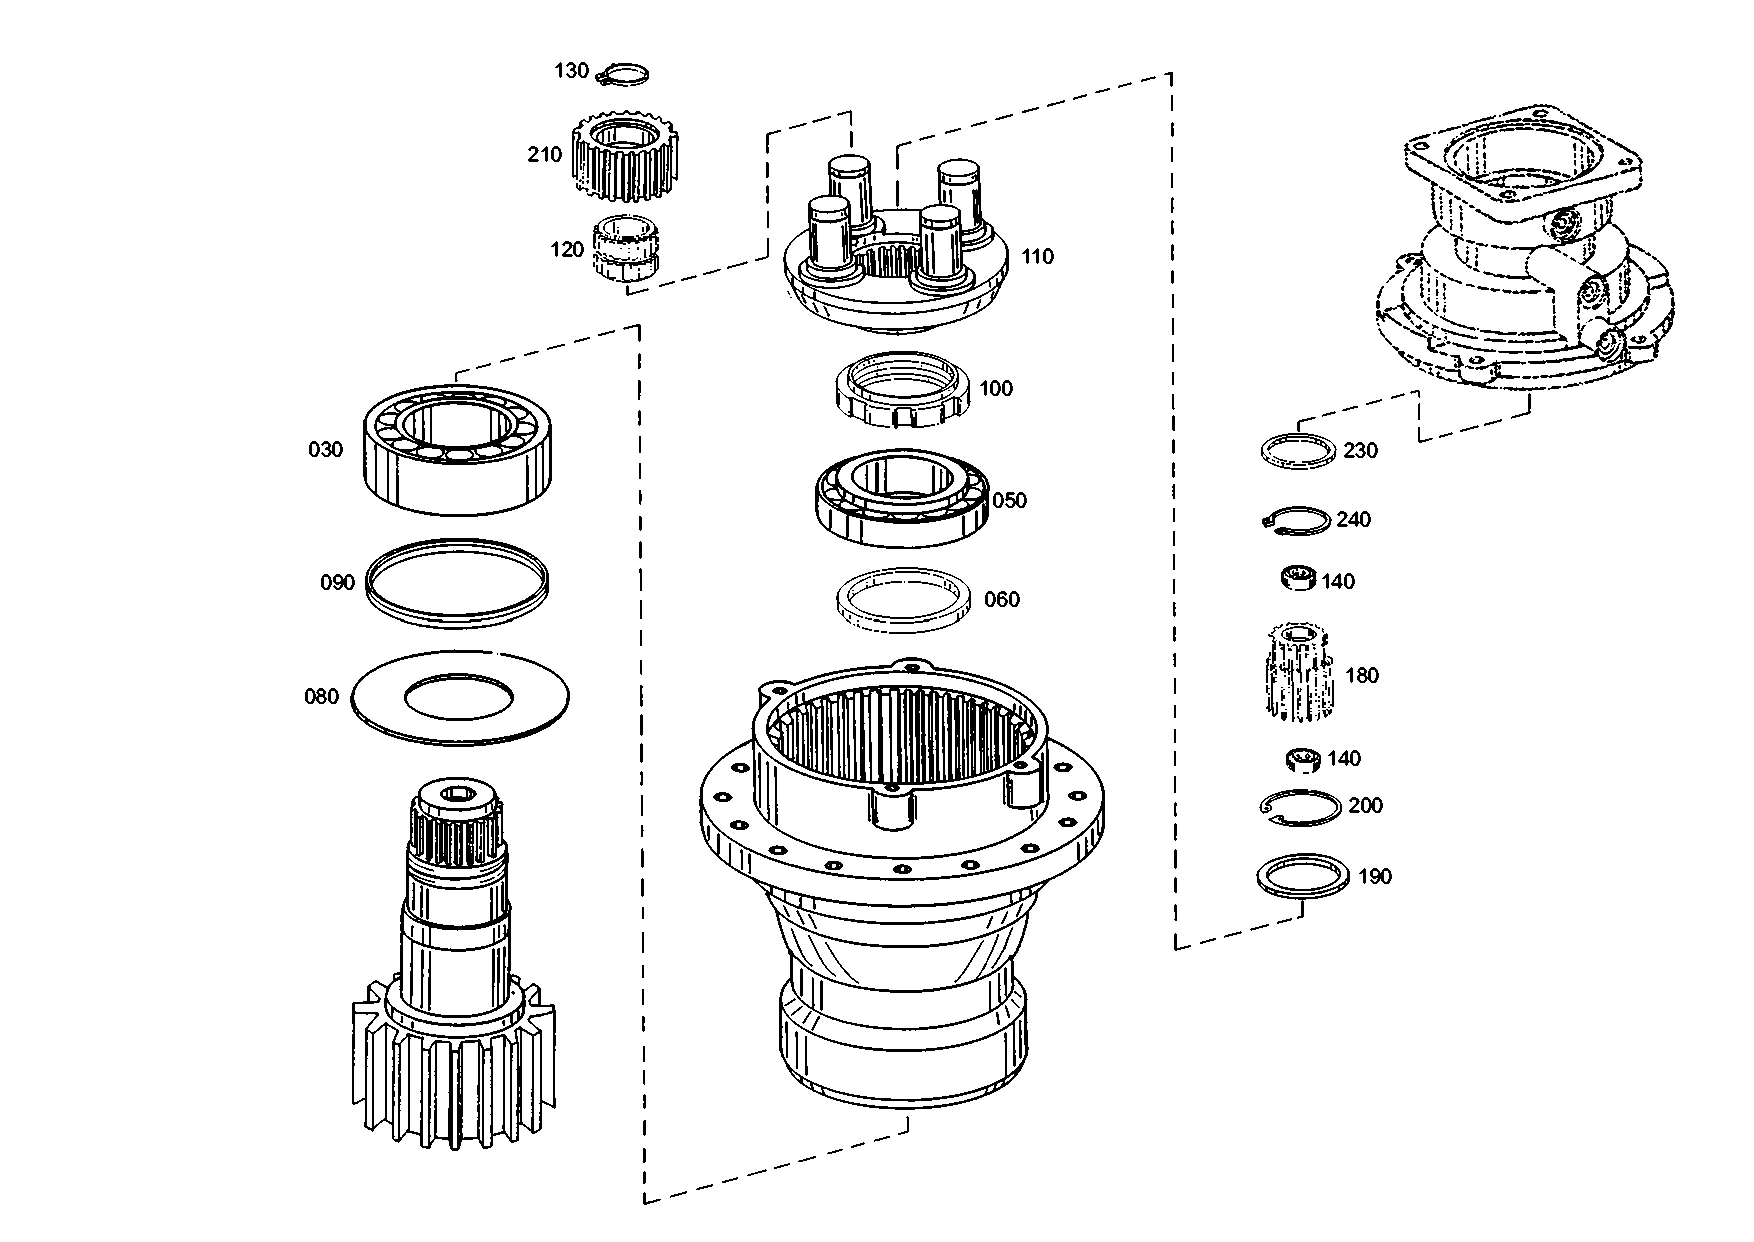 drawing for FUCHS-BAGGER GMBH + CO.KG 5904658875 - ROLLER BEARING (figure 1)